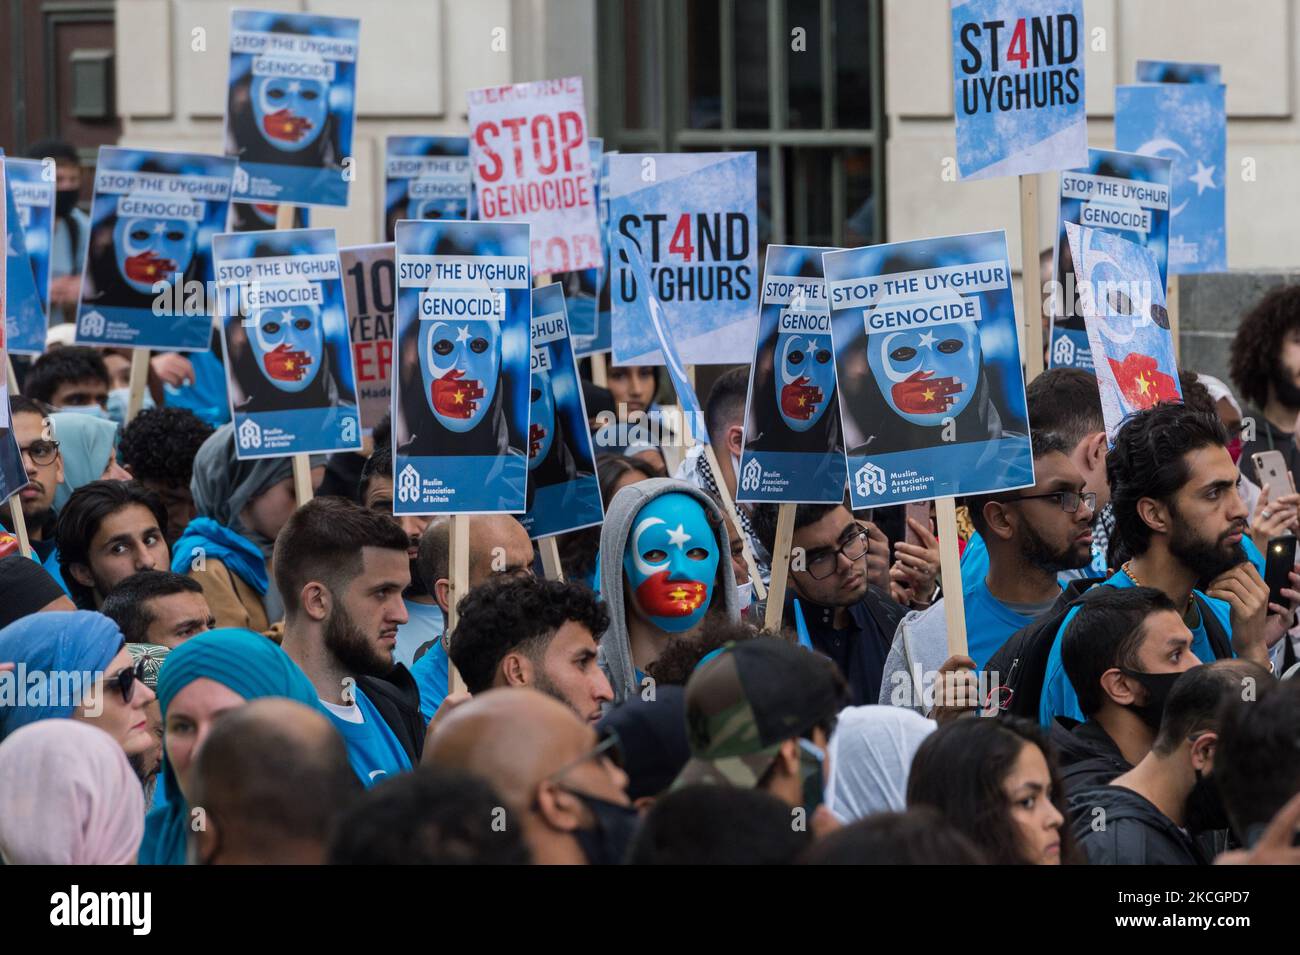 LONDON, UNITED KINGDOM - JULY 01, 2021: Protesters demonstrate in front of the Chinese Embassy in support of the repressed Uyghur Muslim community who live in Xinjiang in northwest China on the 100th anniversary of the founding of the Chinese Communist Party on July 01, 2021 in London, England. (Photo by WIktor Szymanowicz/NurPhoto) Stock Photo